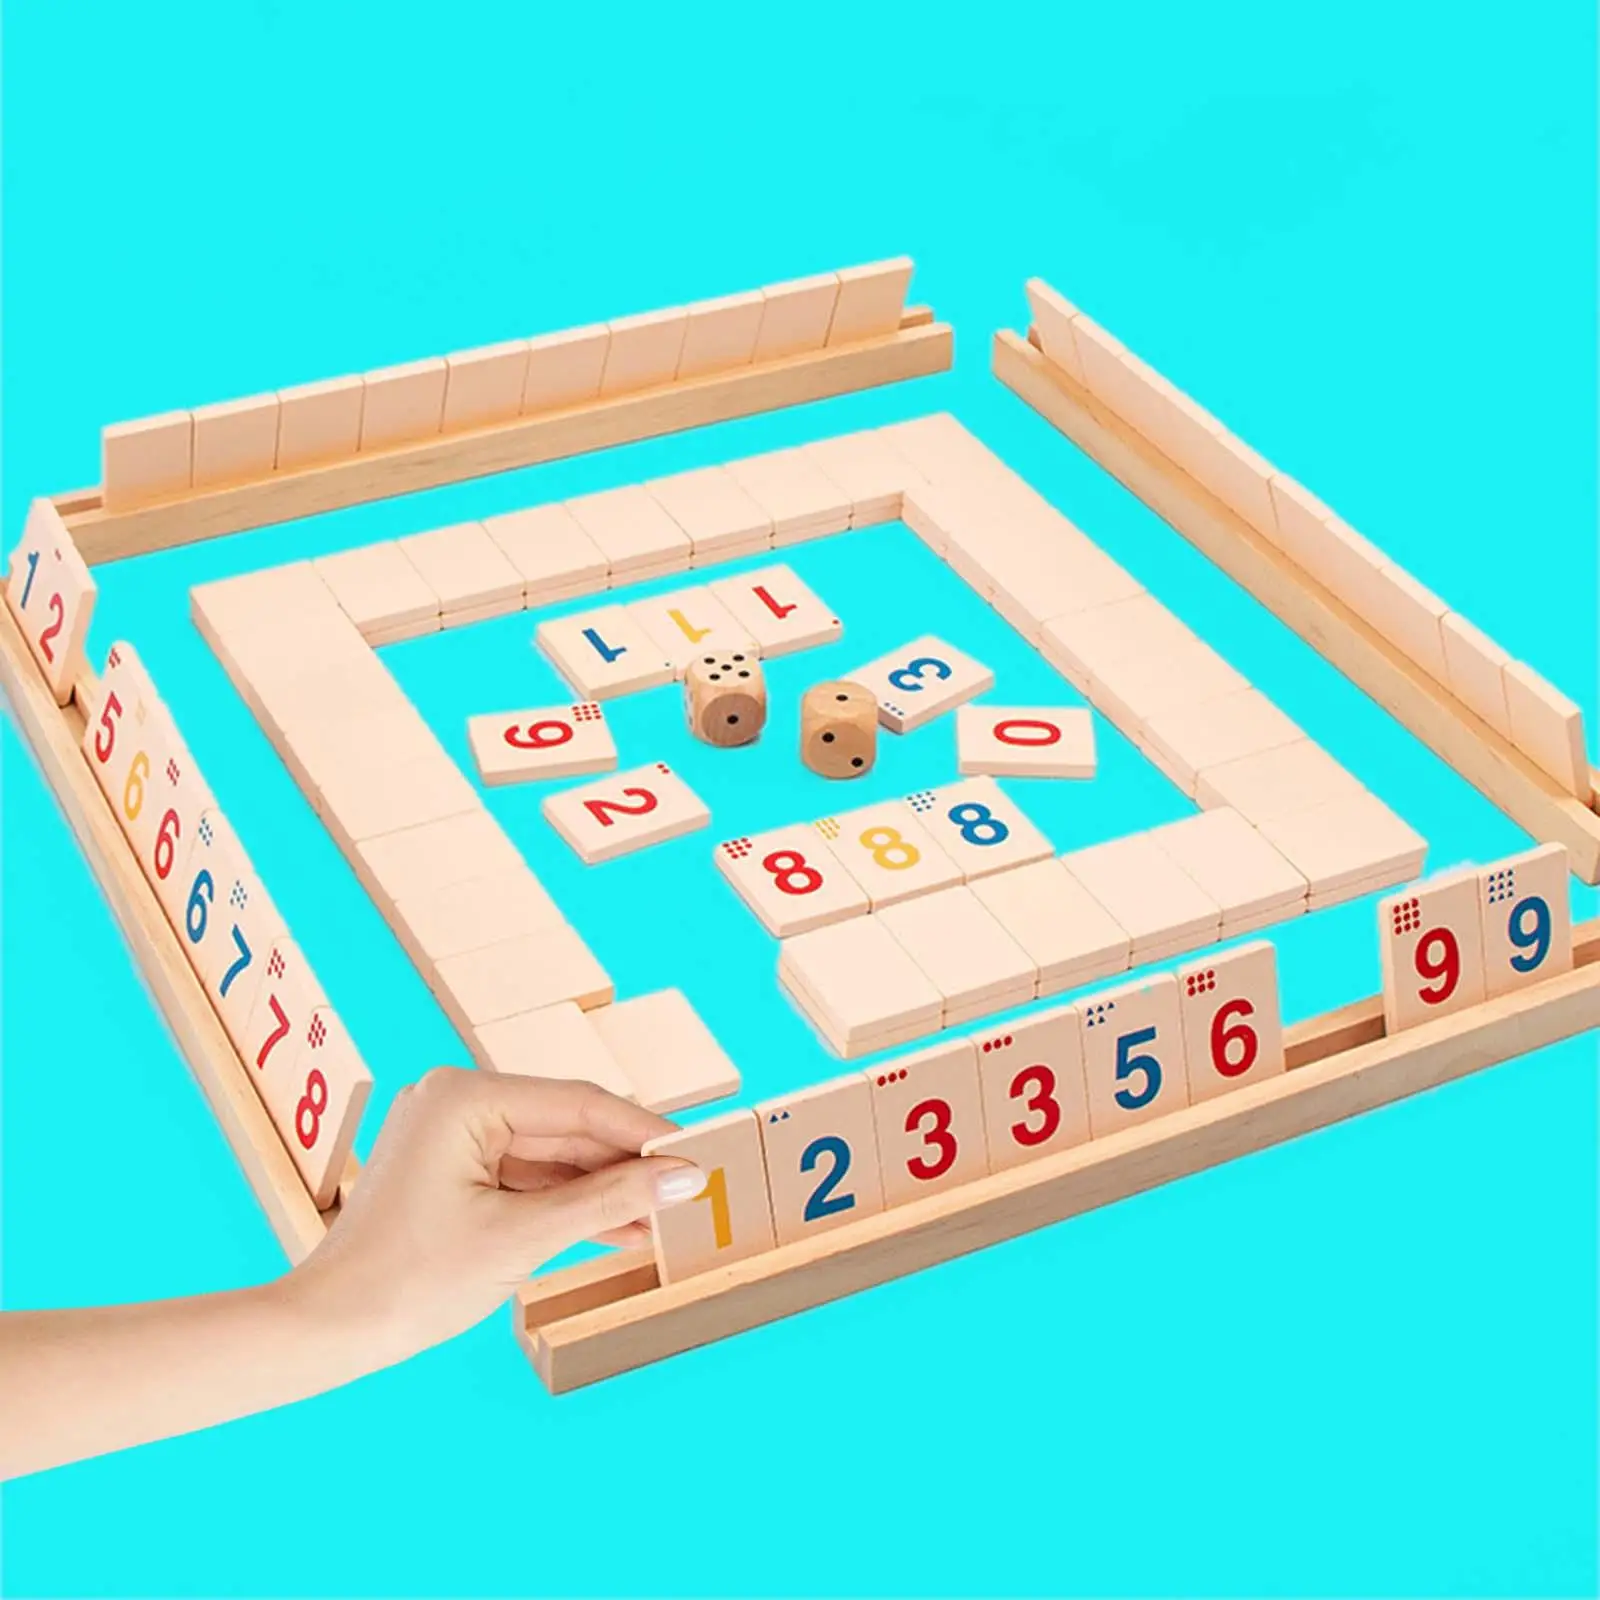 Portable 2-4 People Mahjong Digital Game, Party Game,Classic Board Game, Fast Moving Tile for Kids Adults